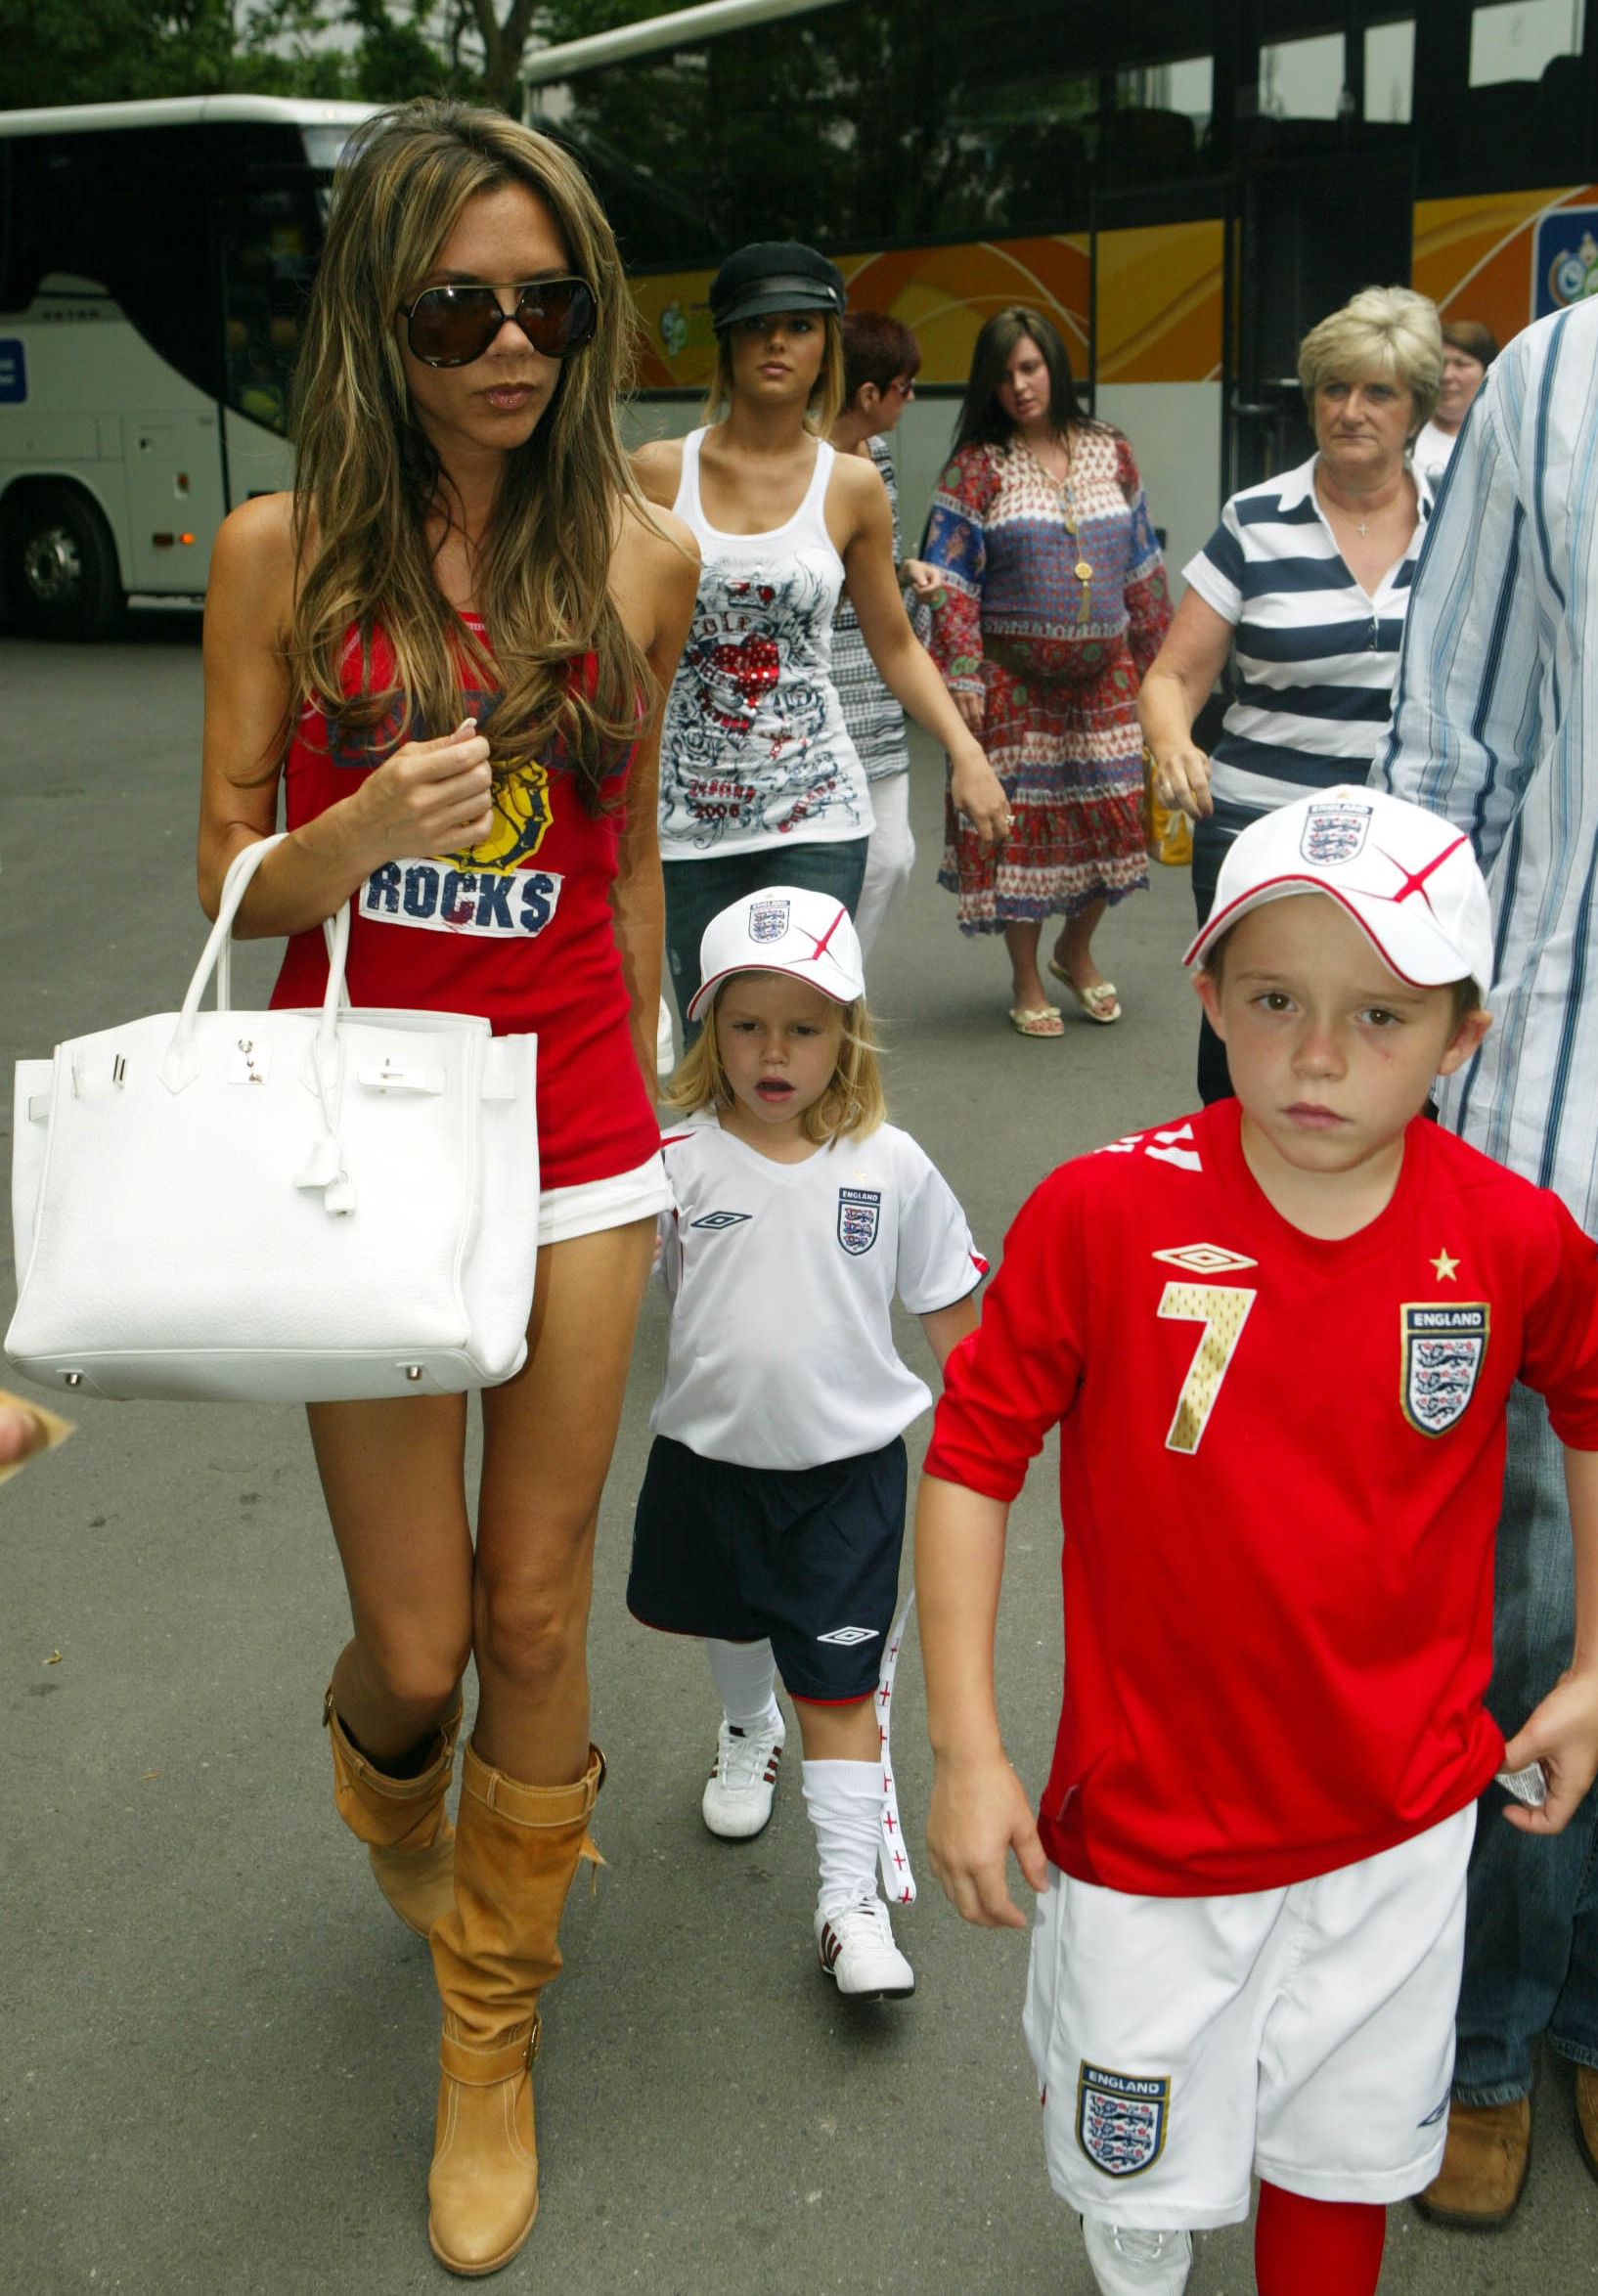 Abbie's icon Victoria Beckham with sons Brooklyn and Romeo pictured back in 2006 during Victoria's 'WAG heyday'